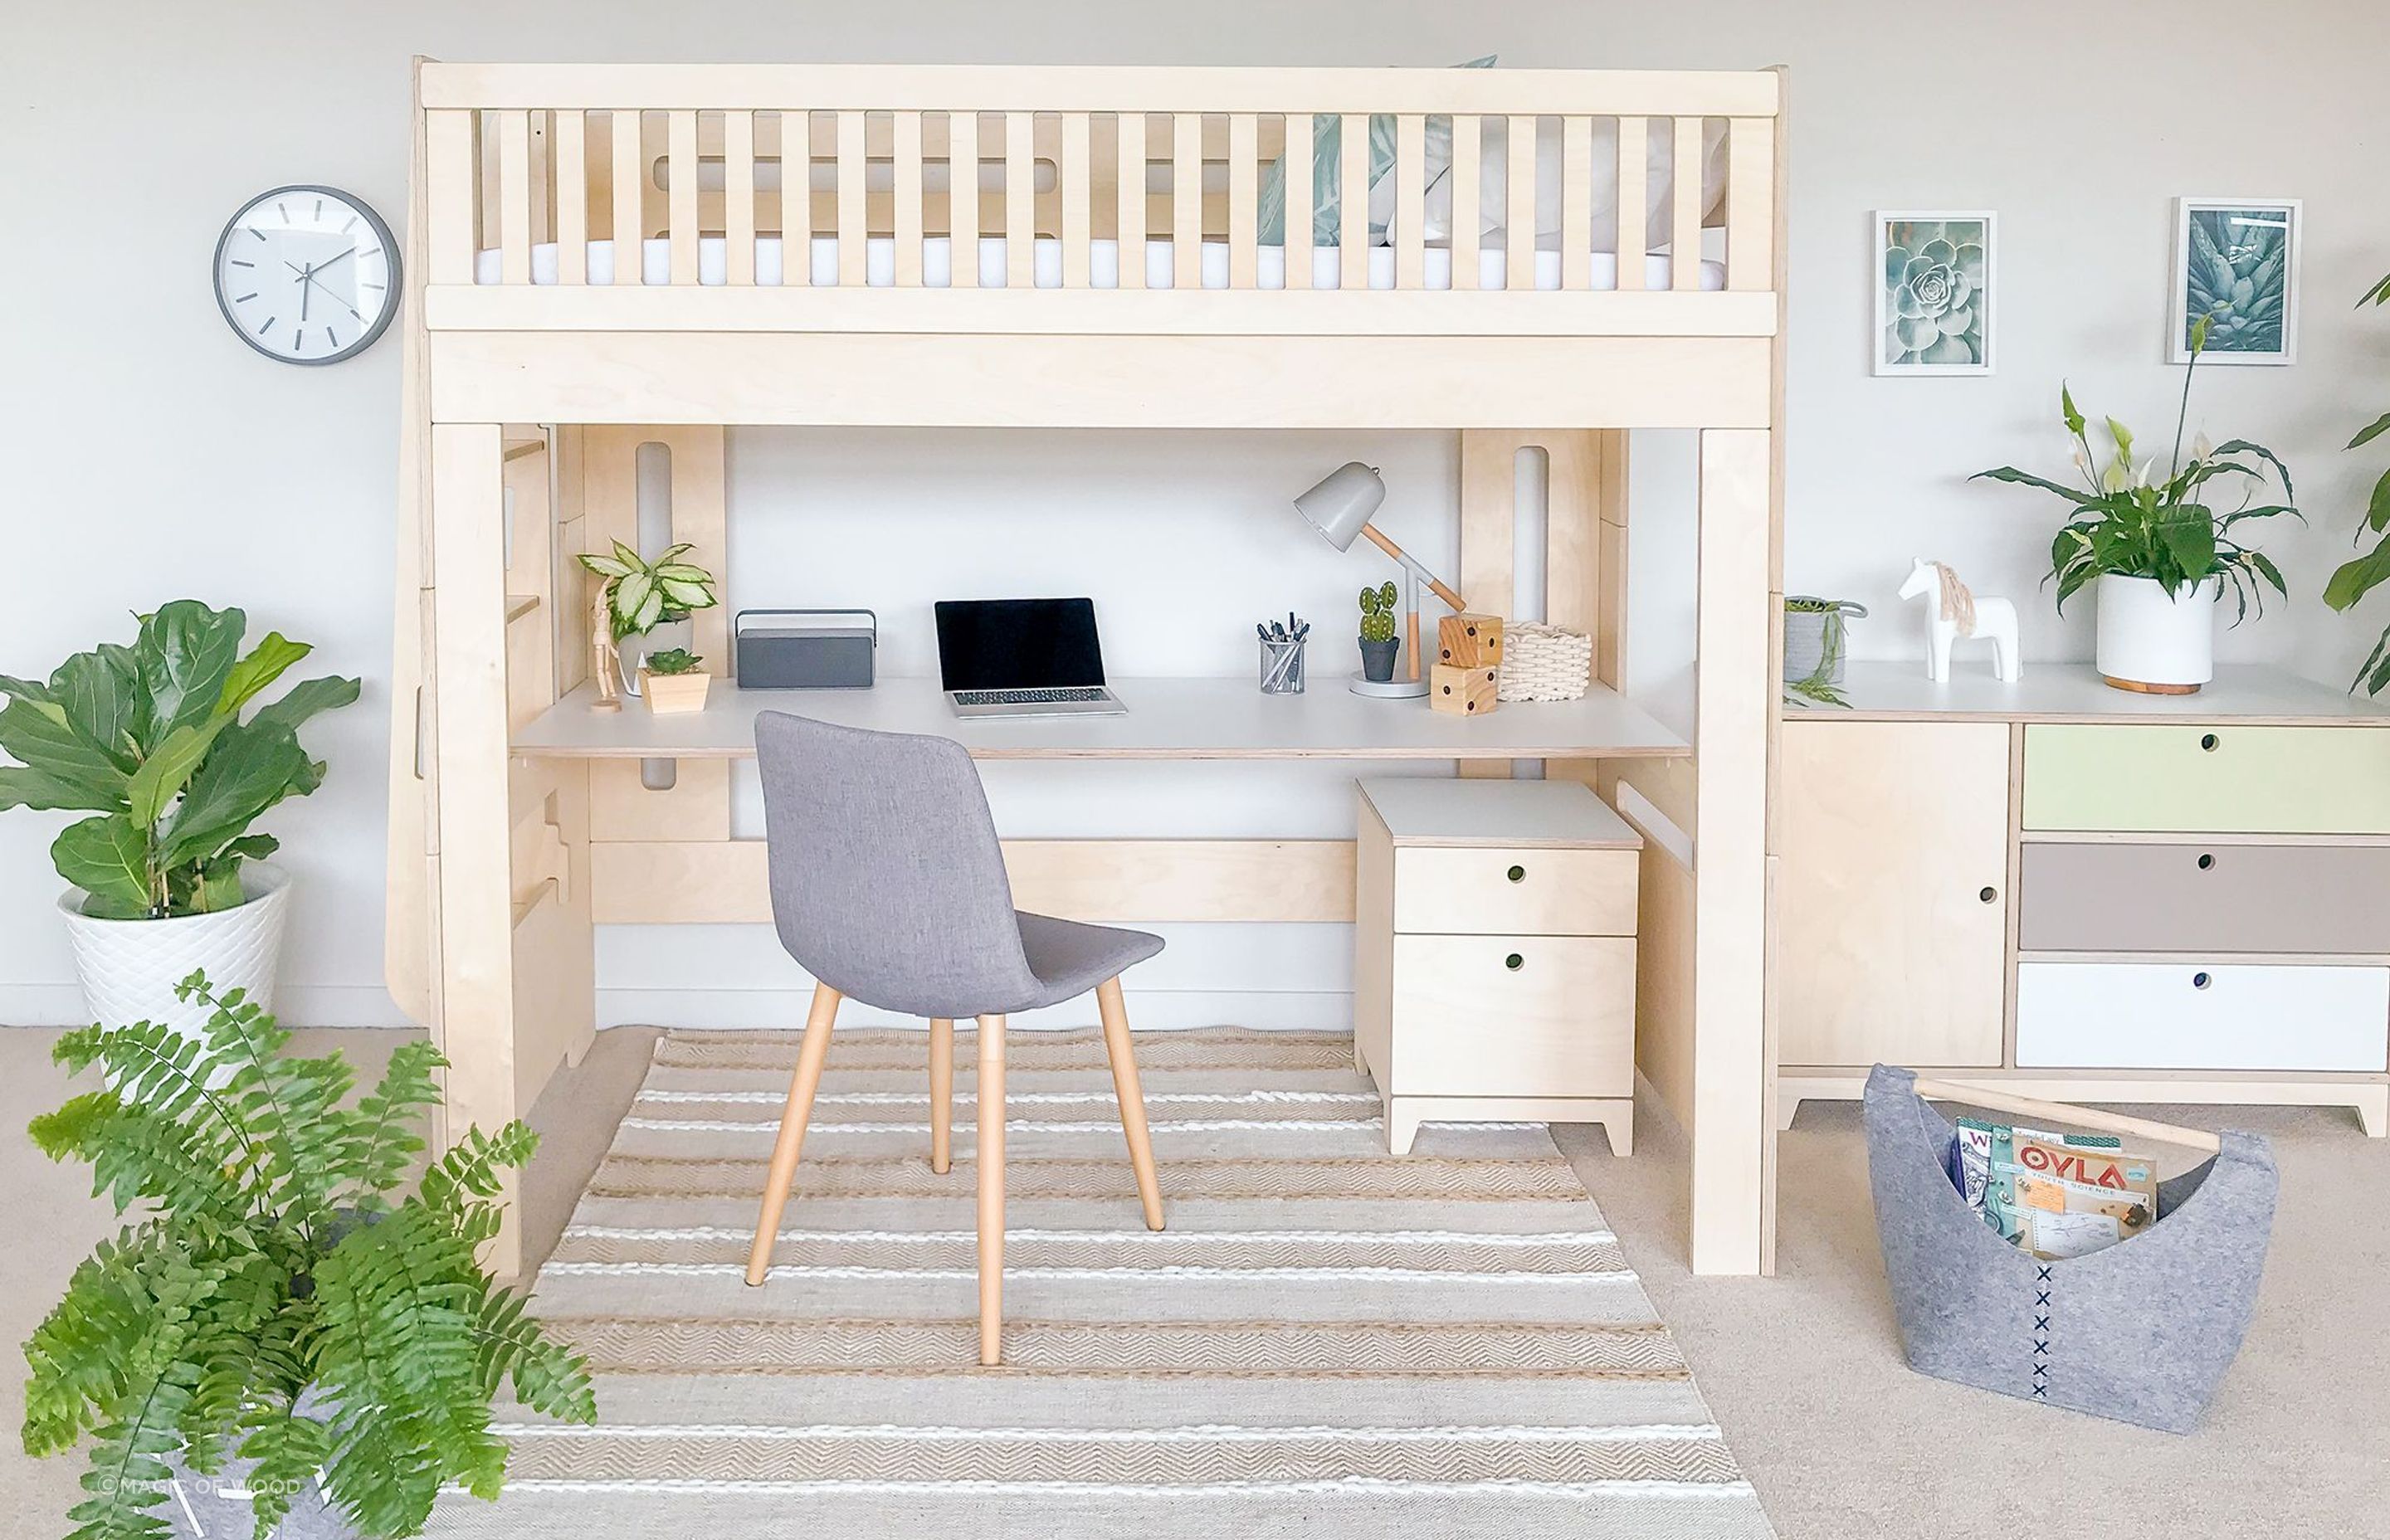 The Scandi Loft bed creates room for learning without sacrificing floor space.